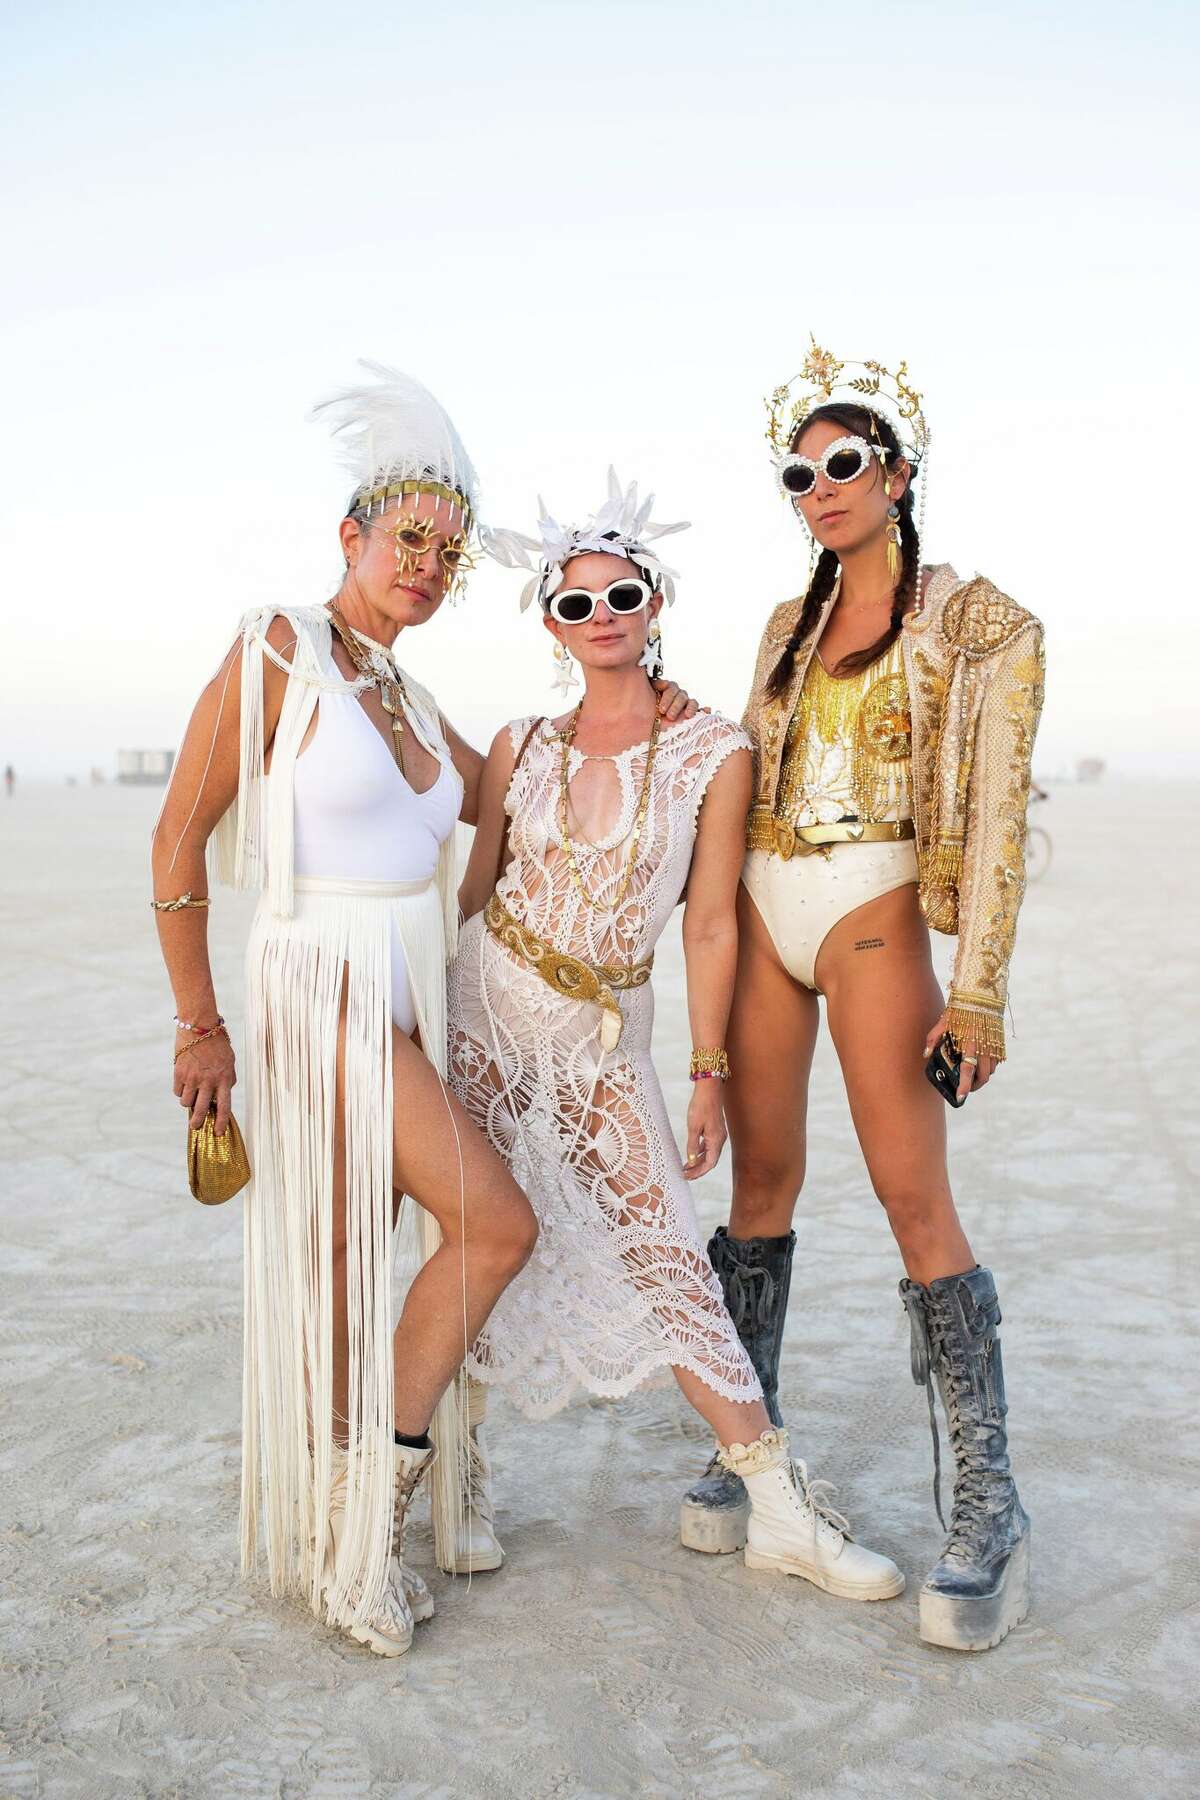 The wildest fashion photos from Burning Man 2022 in2vogue